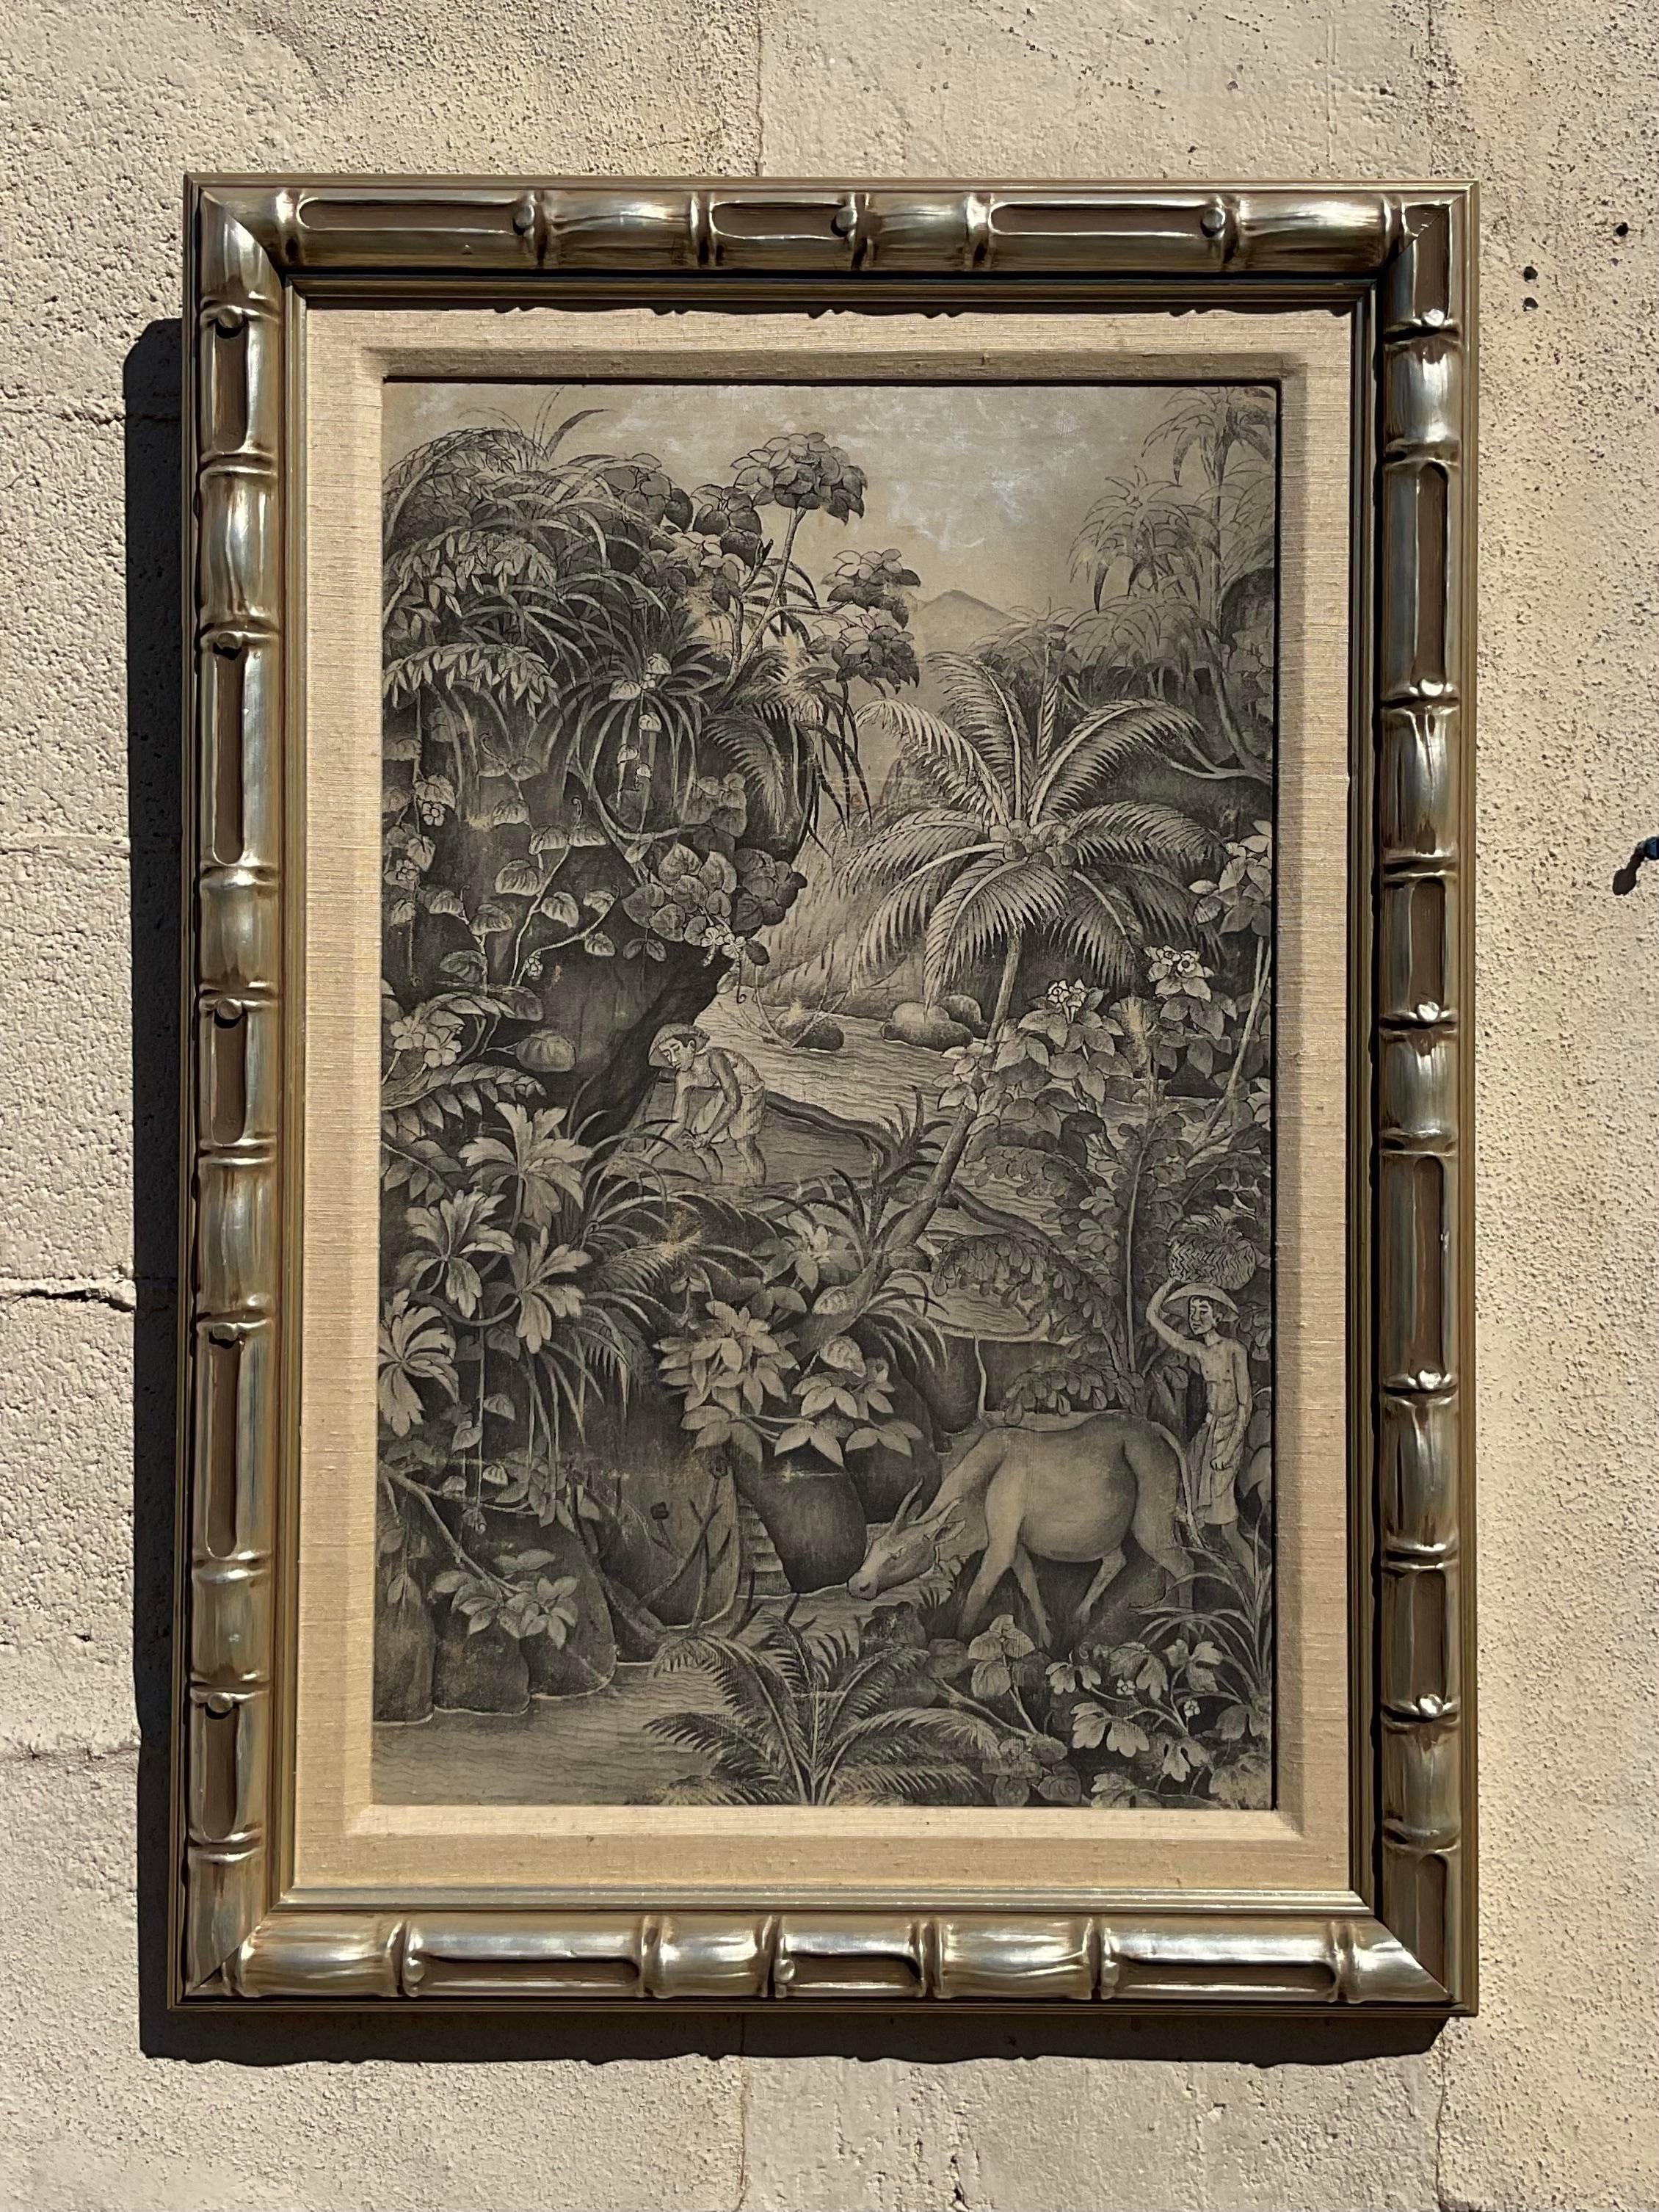 Gorgeous original Painting on canvas that appears almost to be pencil with its delicate stokes. Framed in an incredible gilt faux thick bamboo frame with dimensional linen matting. Whimsical addition to any tropical or eclectic home. Acquired from a